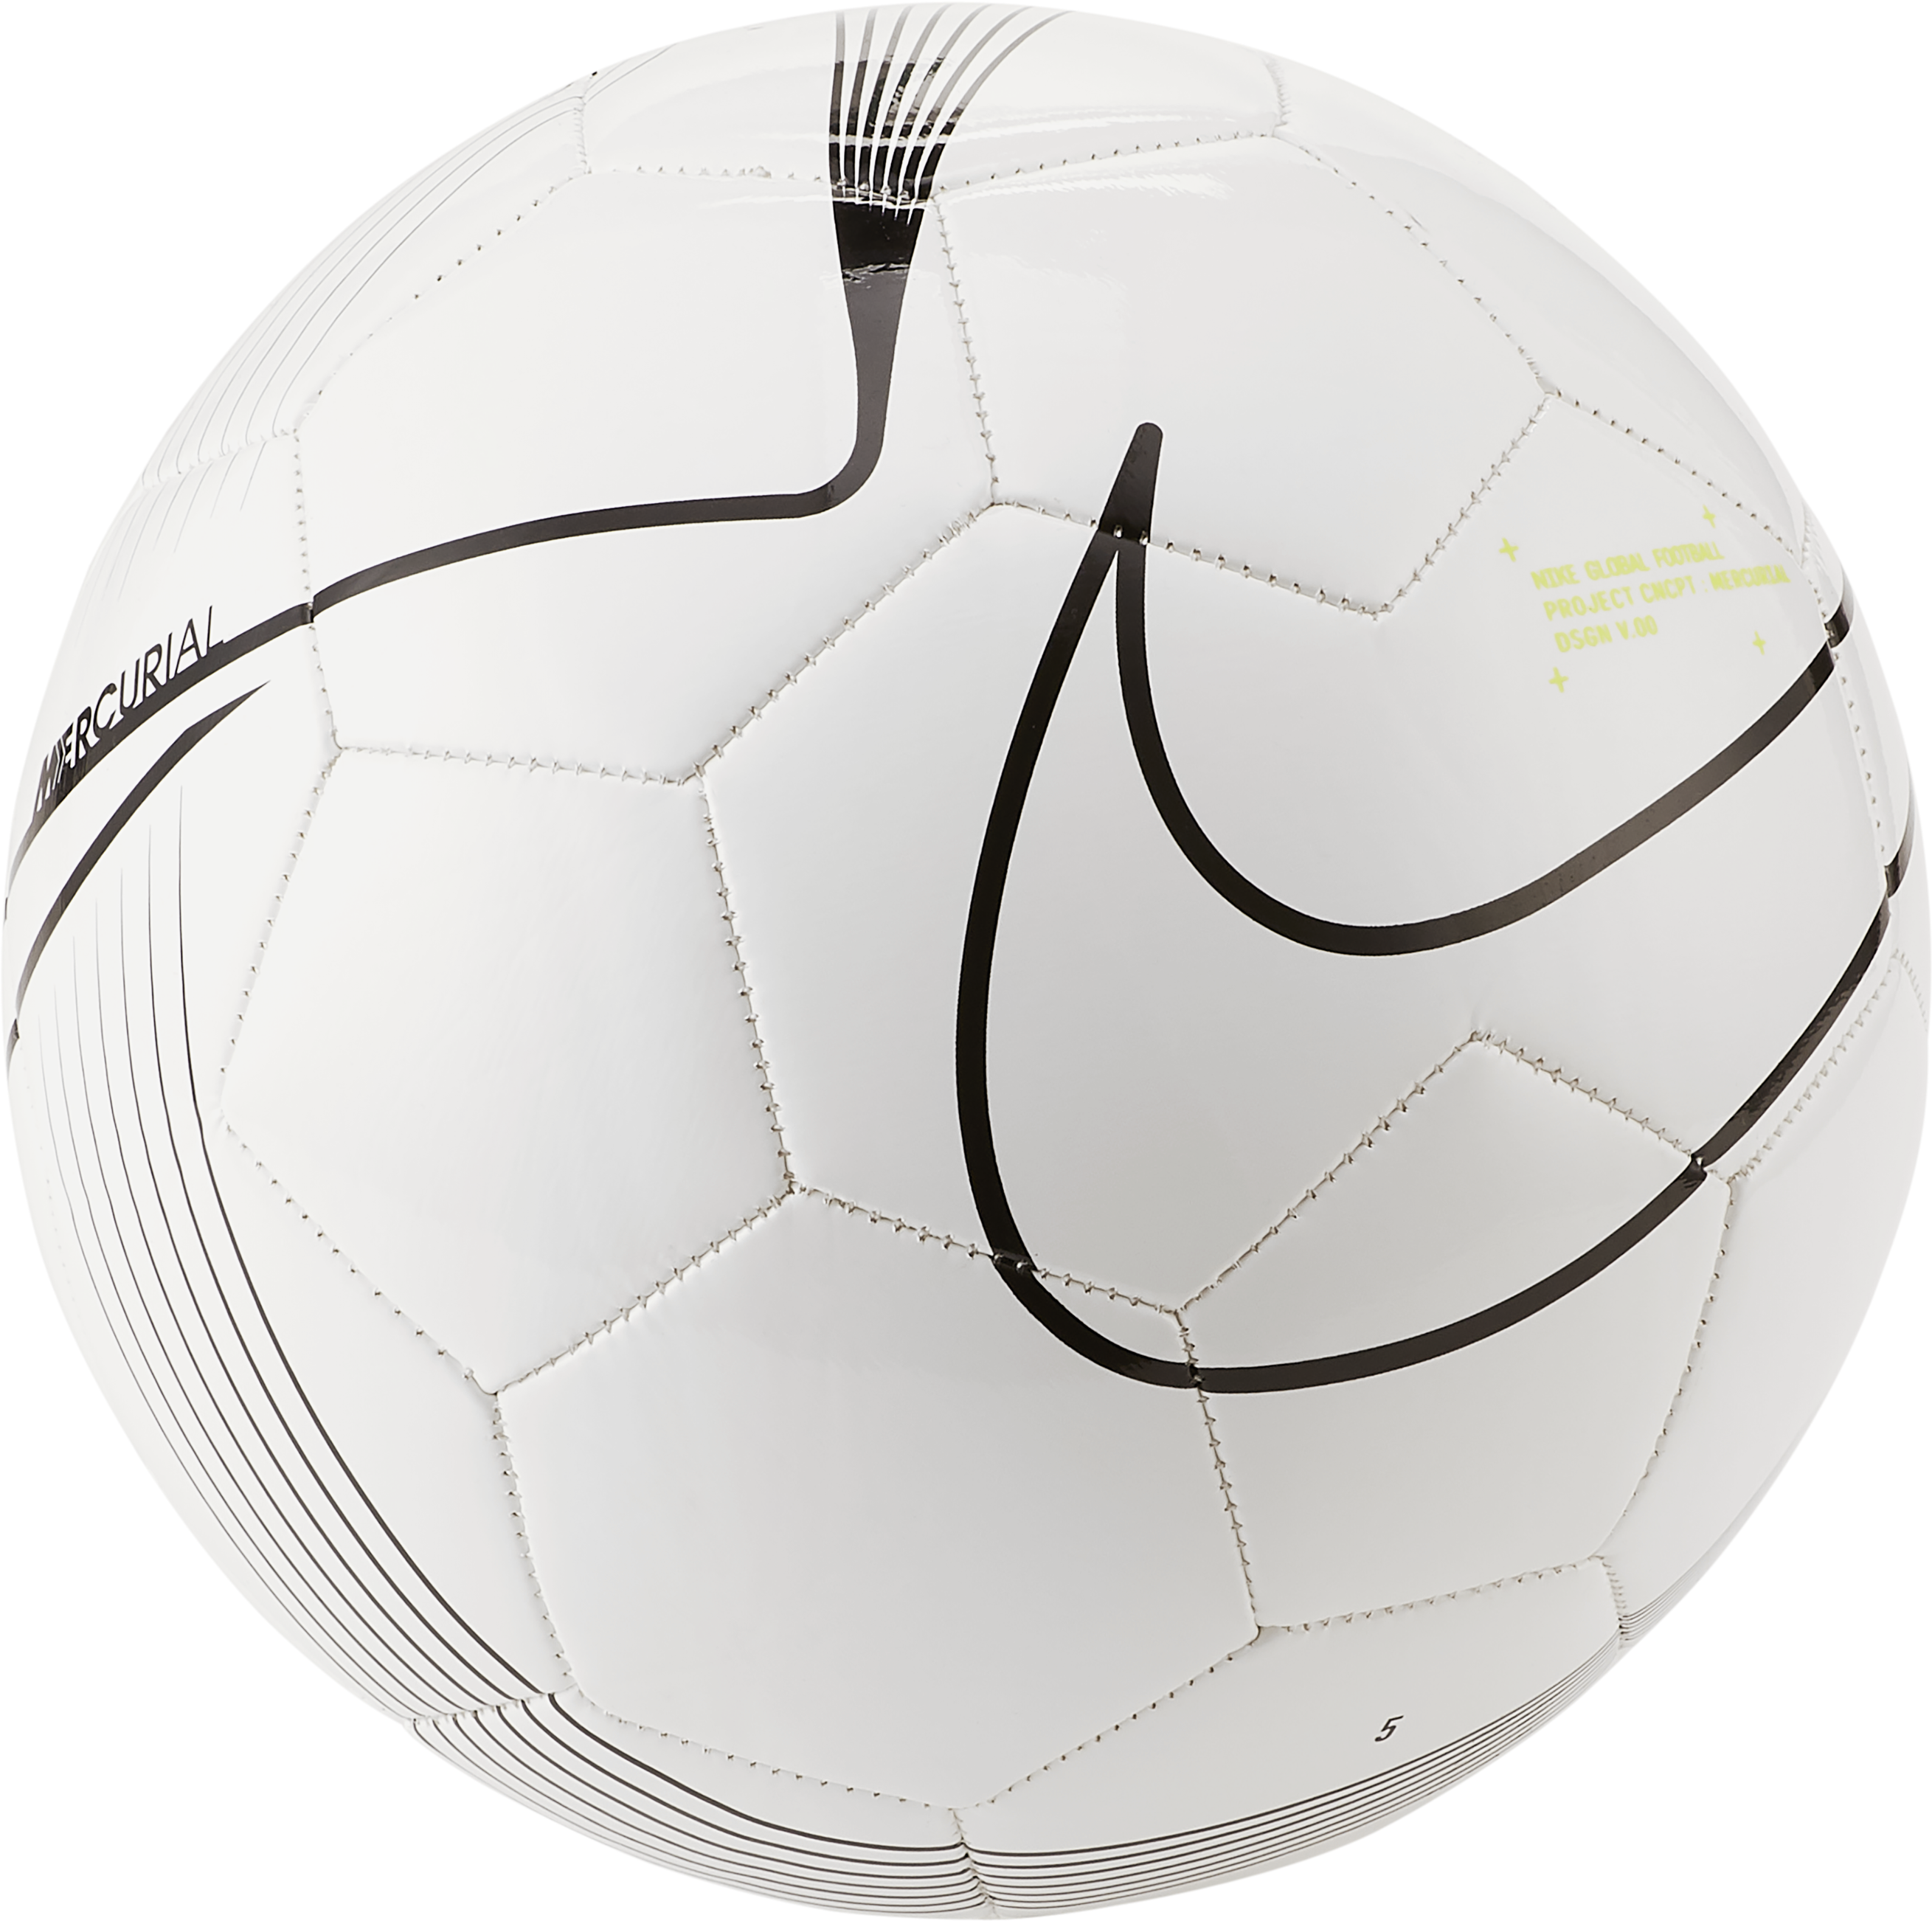 A Football Ball With A Swoosh Design